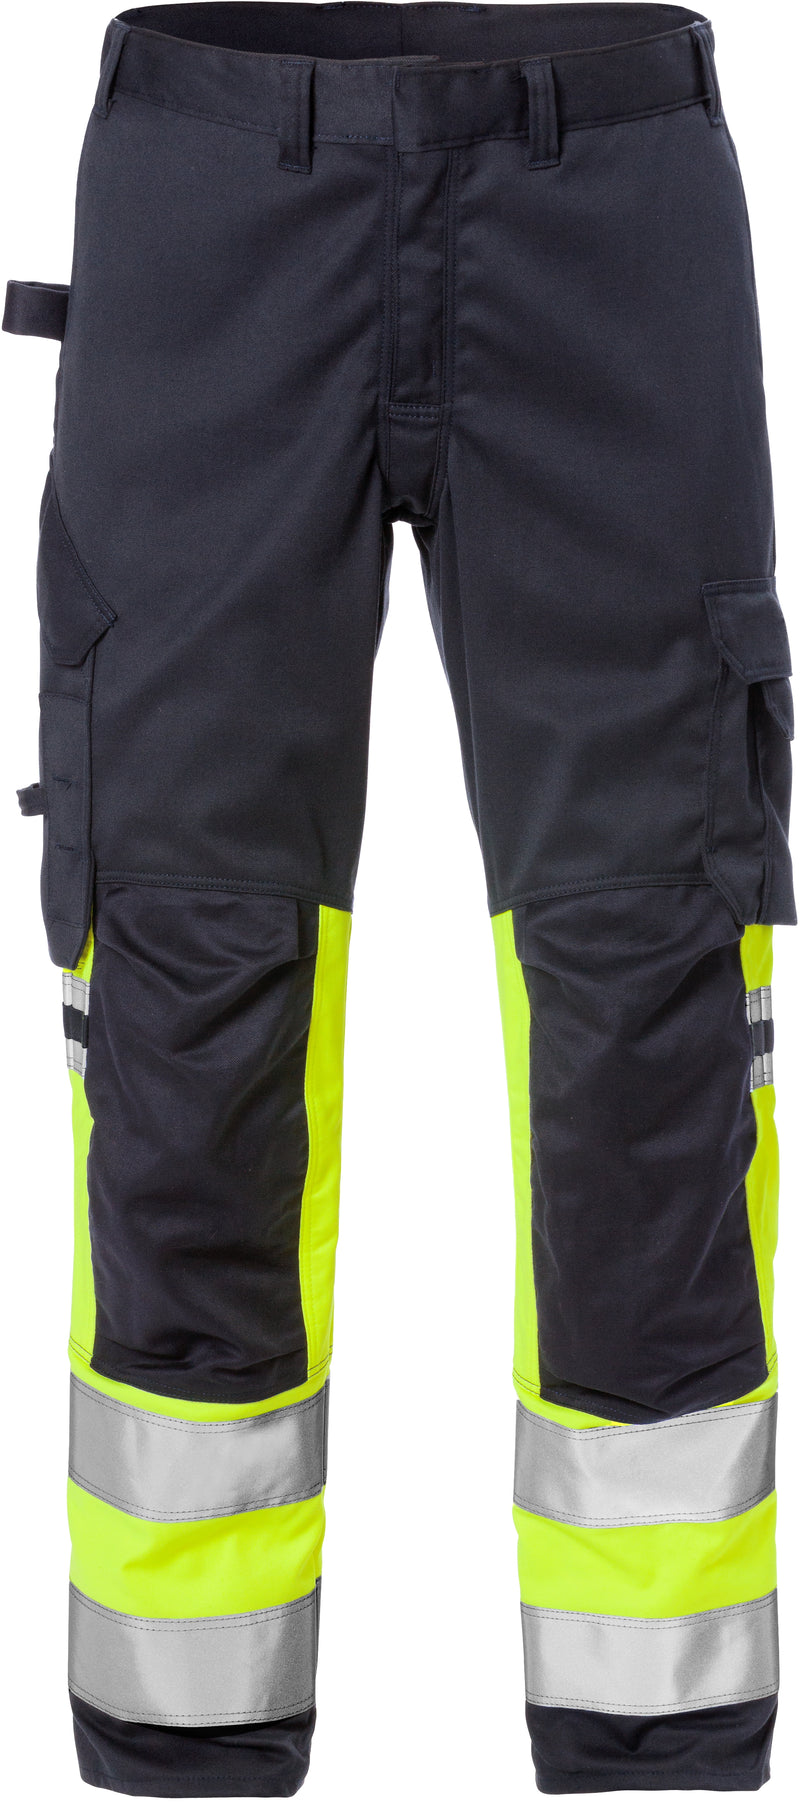 Load image into Gallery viewer, Trousers FRISTADS FLAMESTAT HIGH VIS STRETCH TROUSERS CLASS 1 2162 ATHF
